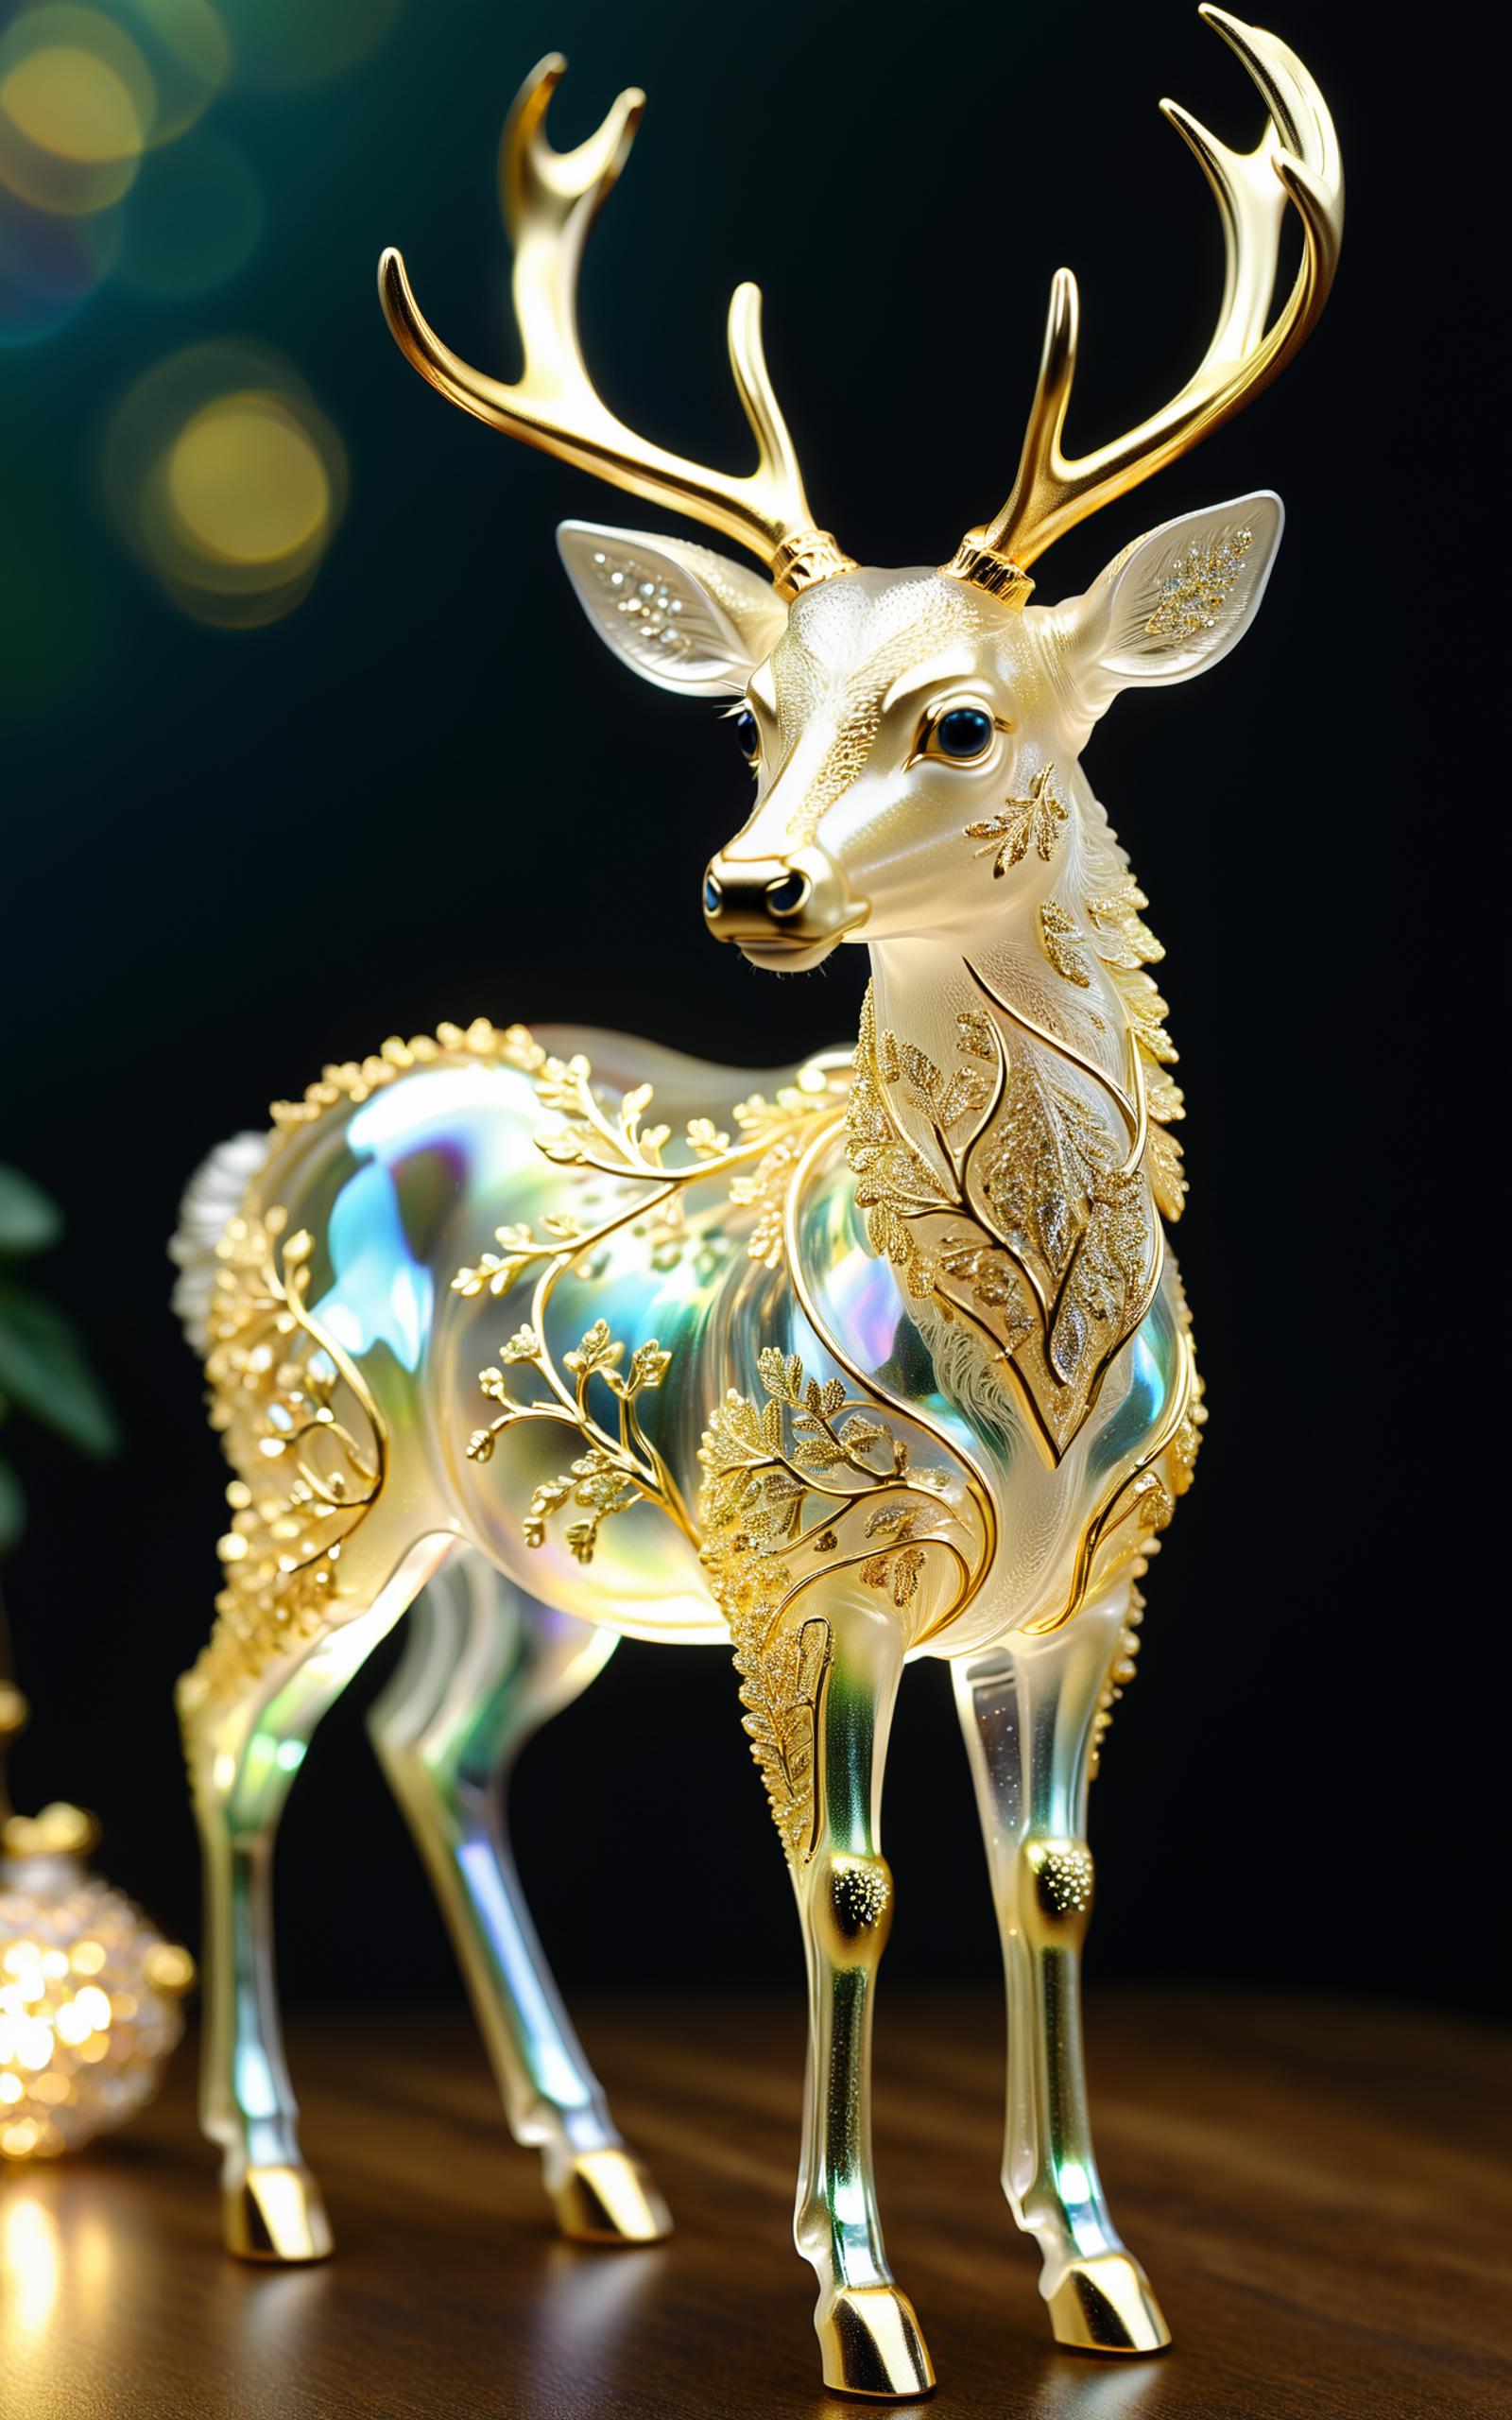 A golden deer figurine with a tree design on its back.